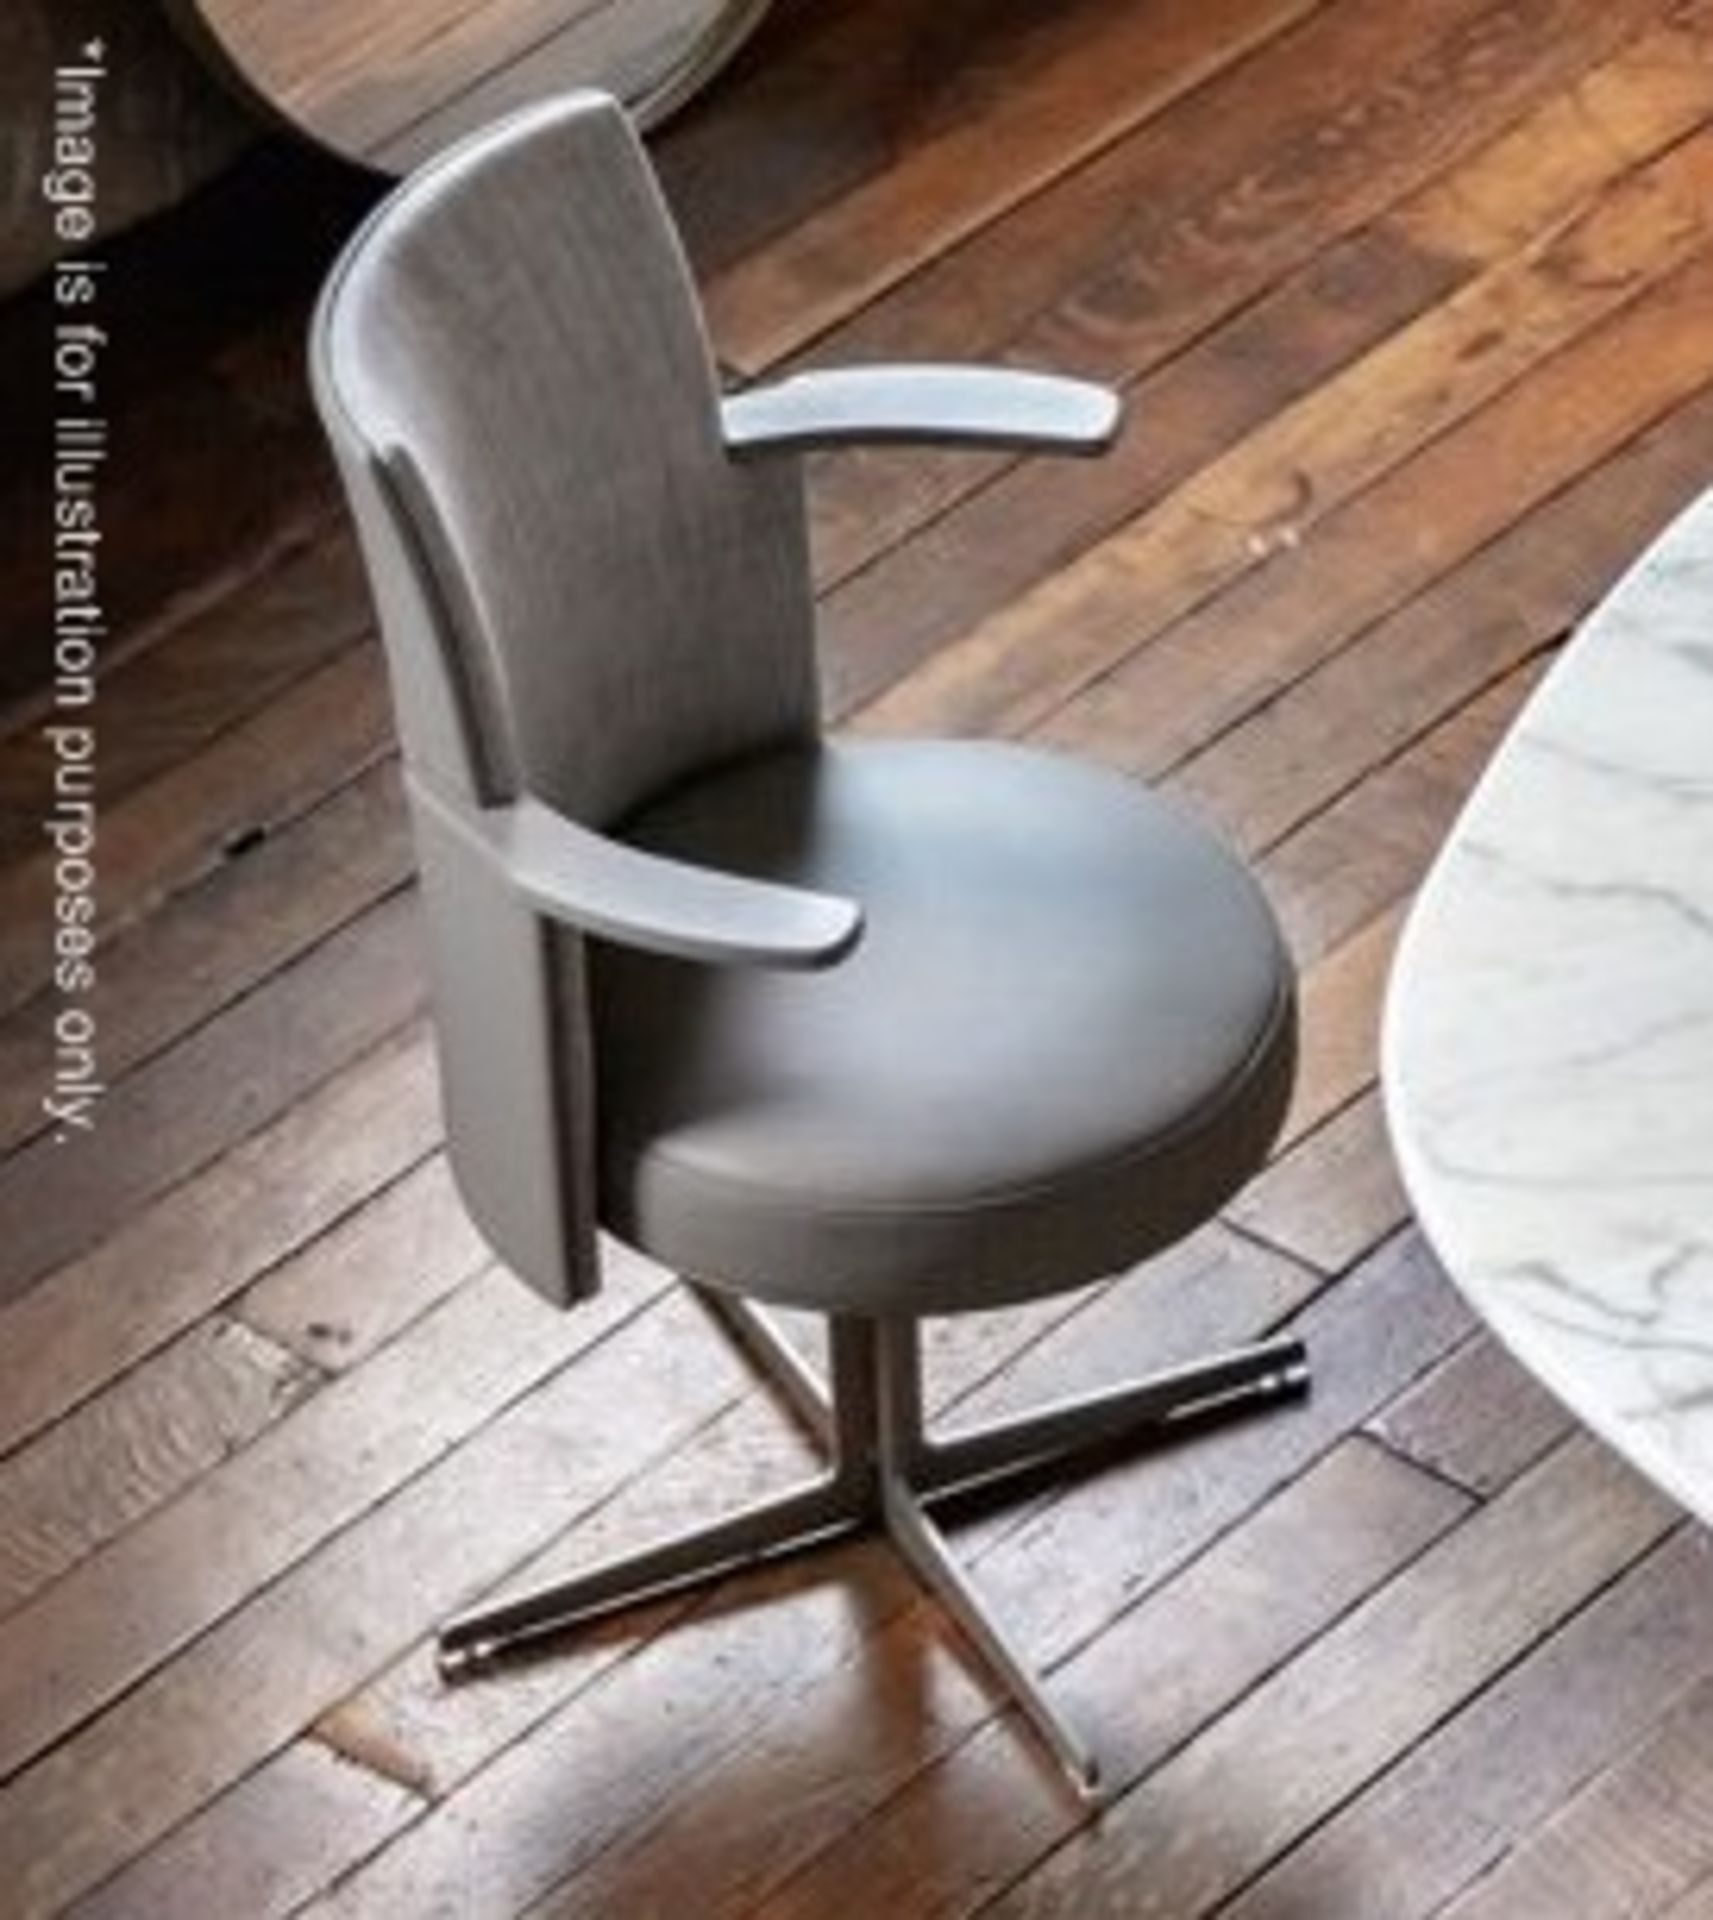 1 x POLTRONA FRAU 'Jeff' Designer Swivel Chair With Arms - Upholstered In Leather And Premium Fabric